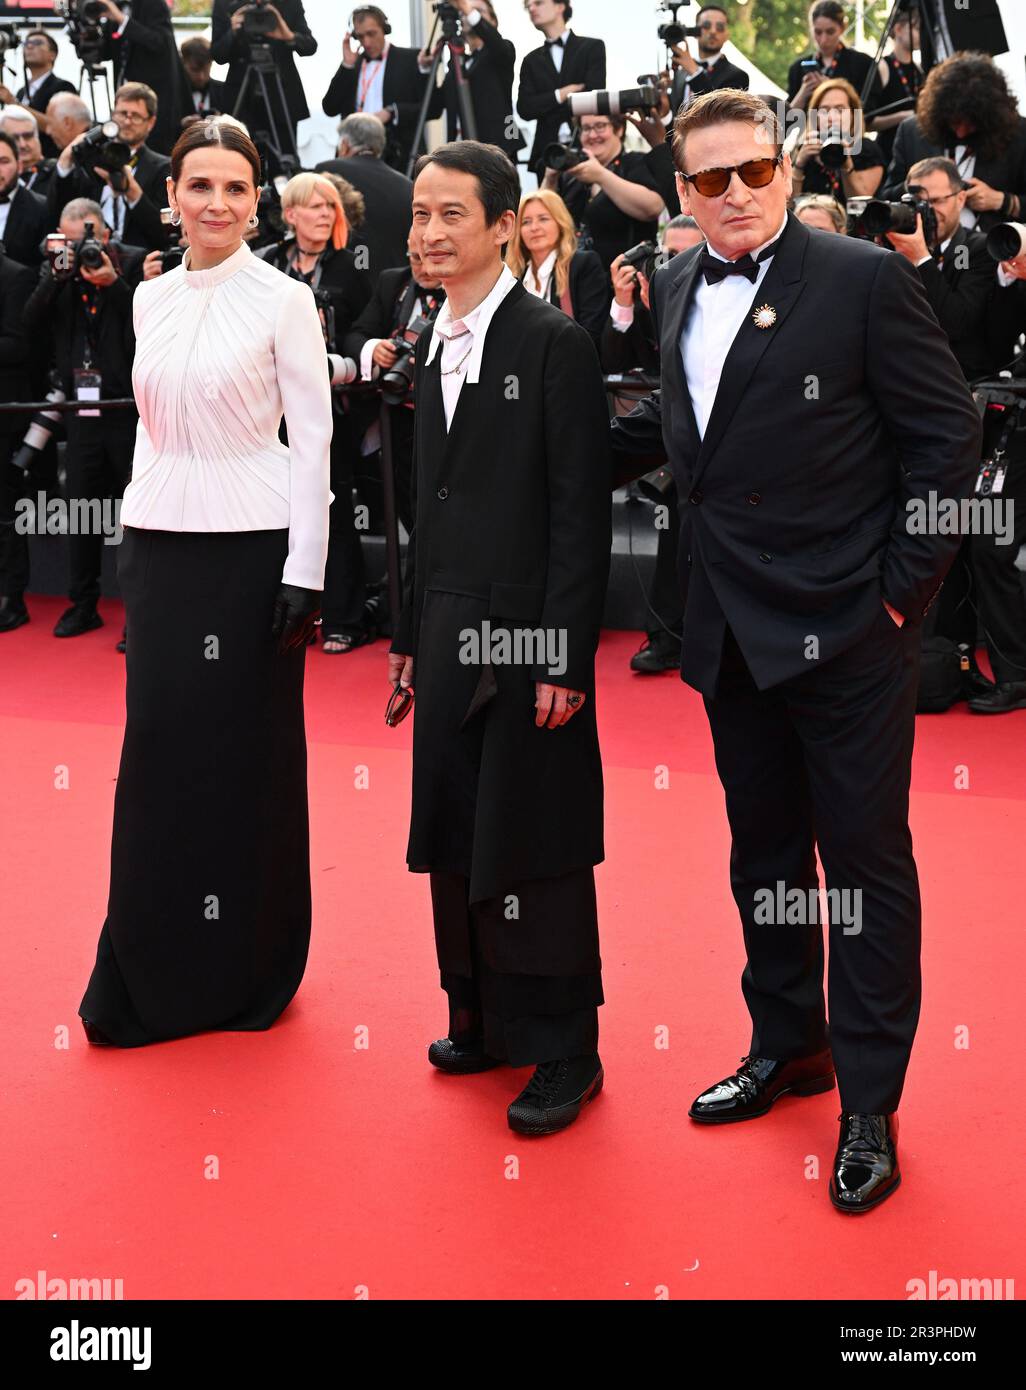 Cannes, France. 24th May, 2023. Lao director Tran Anh Hung, French actress Juliette Binoche and actor Benoit Magimel attend the premiere of The Pot-Au-Feu at the 76th Cannes Film Festival at Palais des Festivals in Cannes, France on Wednesday, May 24, 2023. Photo by Rune Hellestad/ Credit: UPI/Alamy Live News Stock Photo